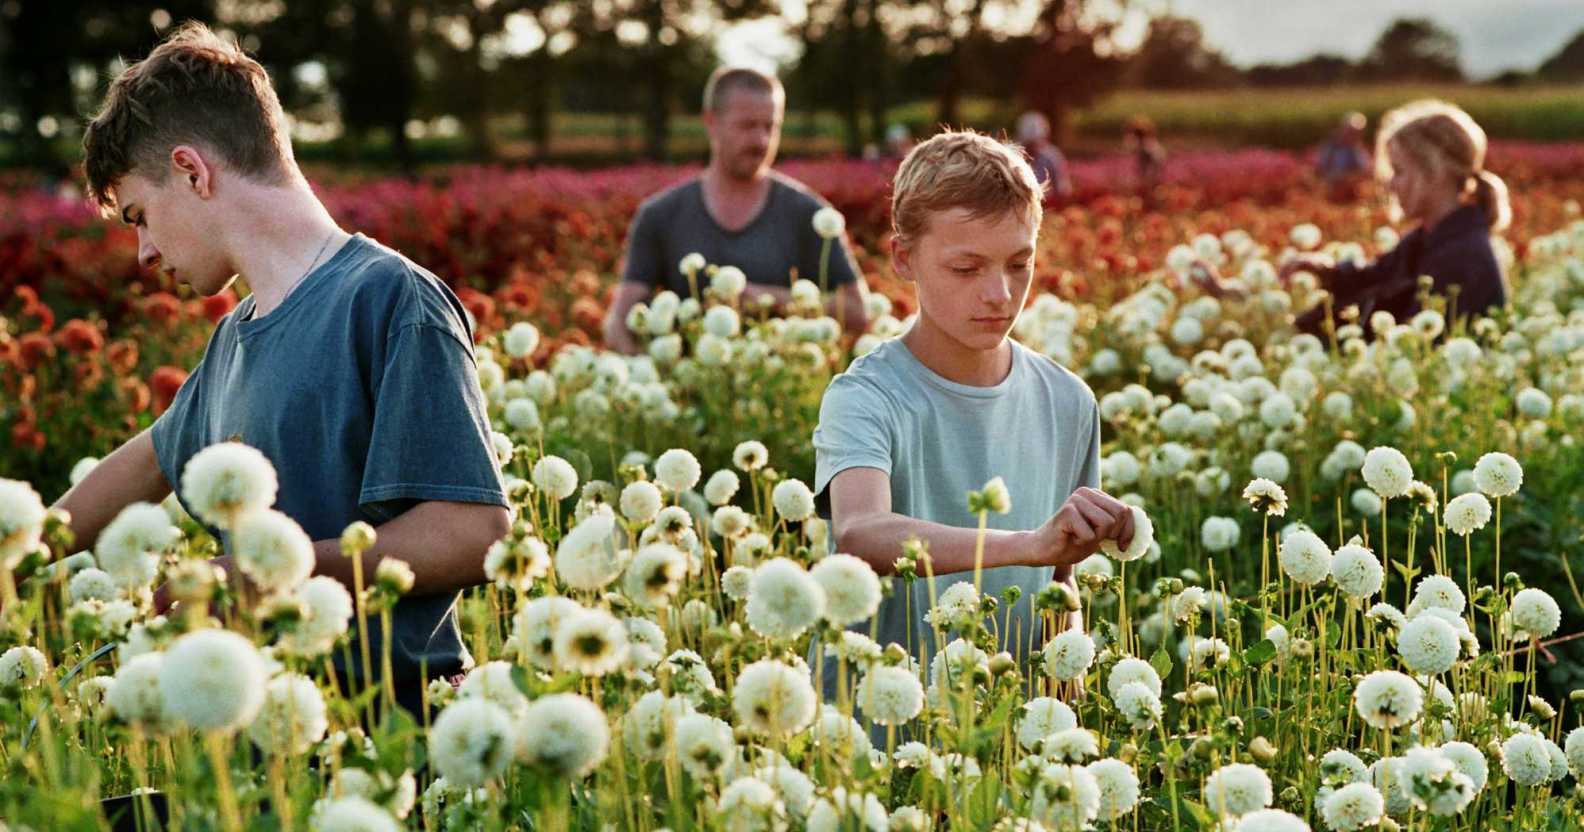 A still from the film Close shows four people standing in a field of dandelions